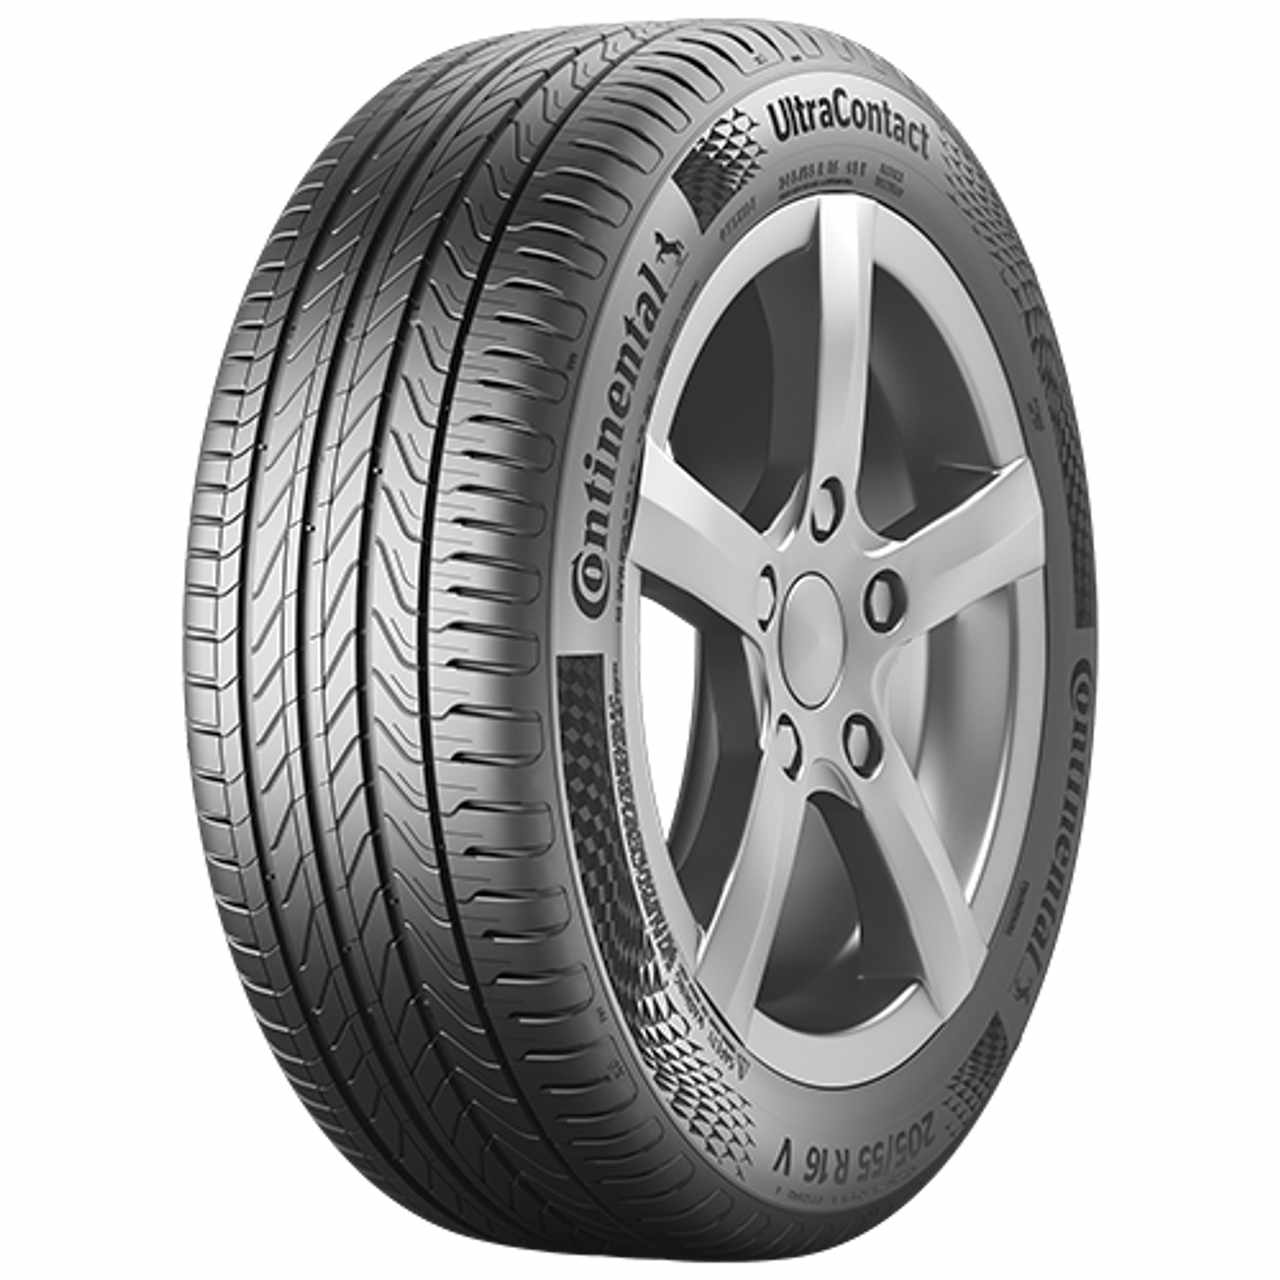 CONTINENTAL ULTRACONTACT (EVc) 165/70R14 81T BSW von Continental